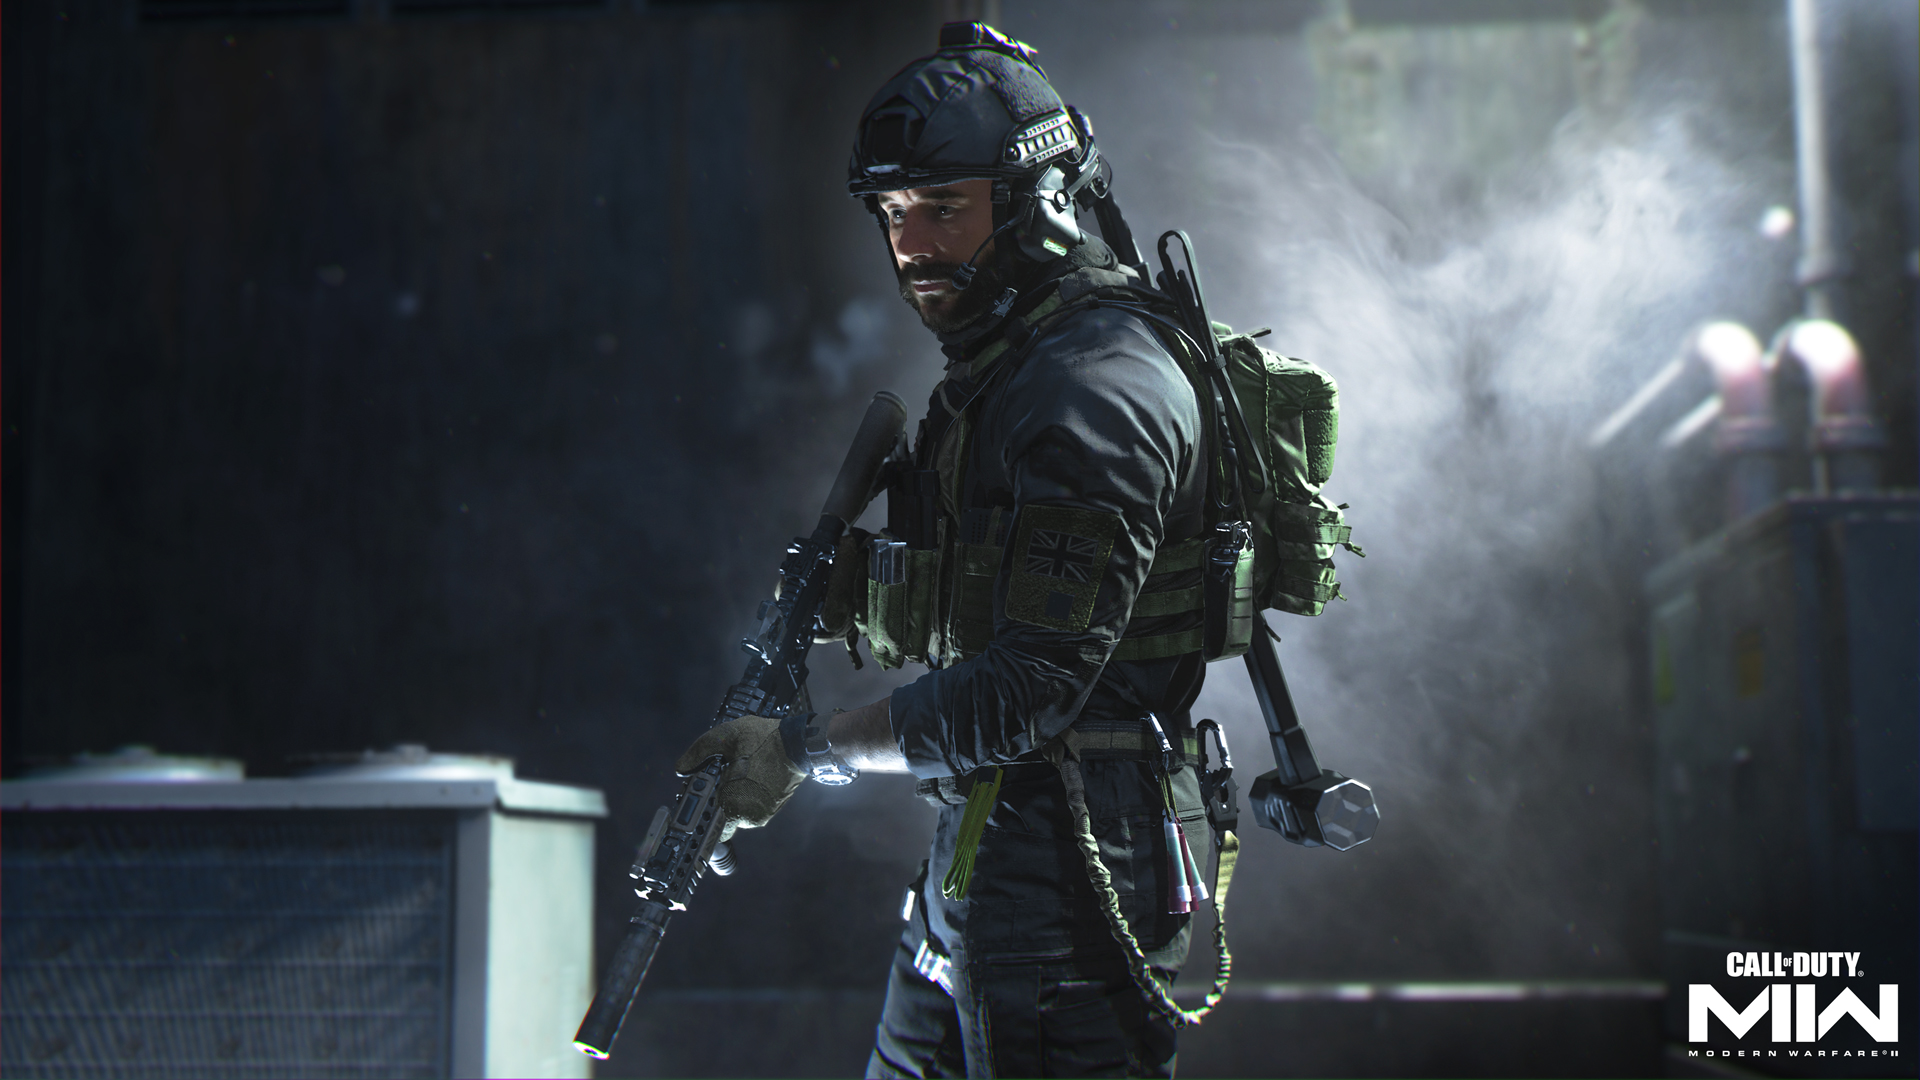 Call of Duty 2023 a “premium release”, could be MW2 expansion